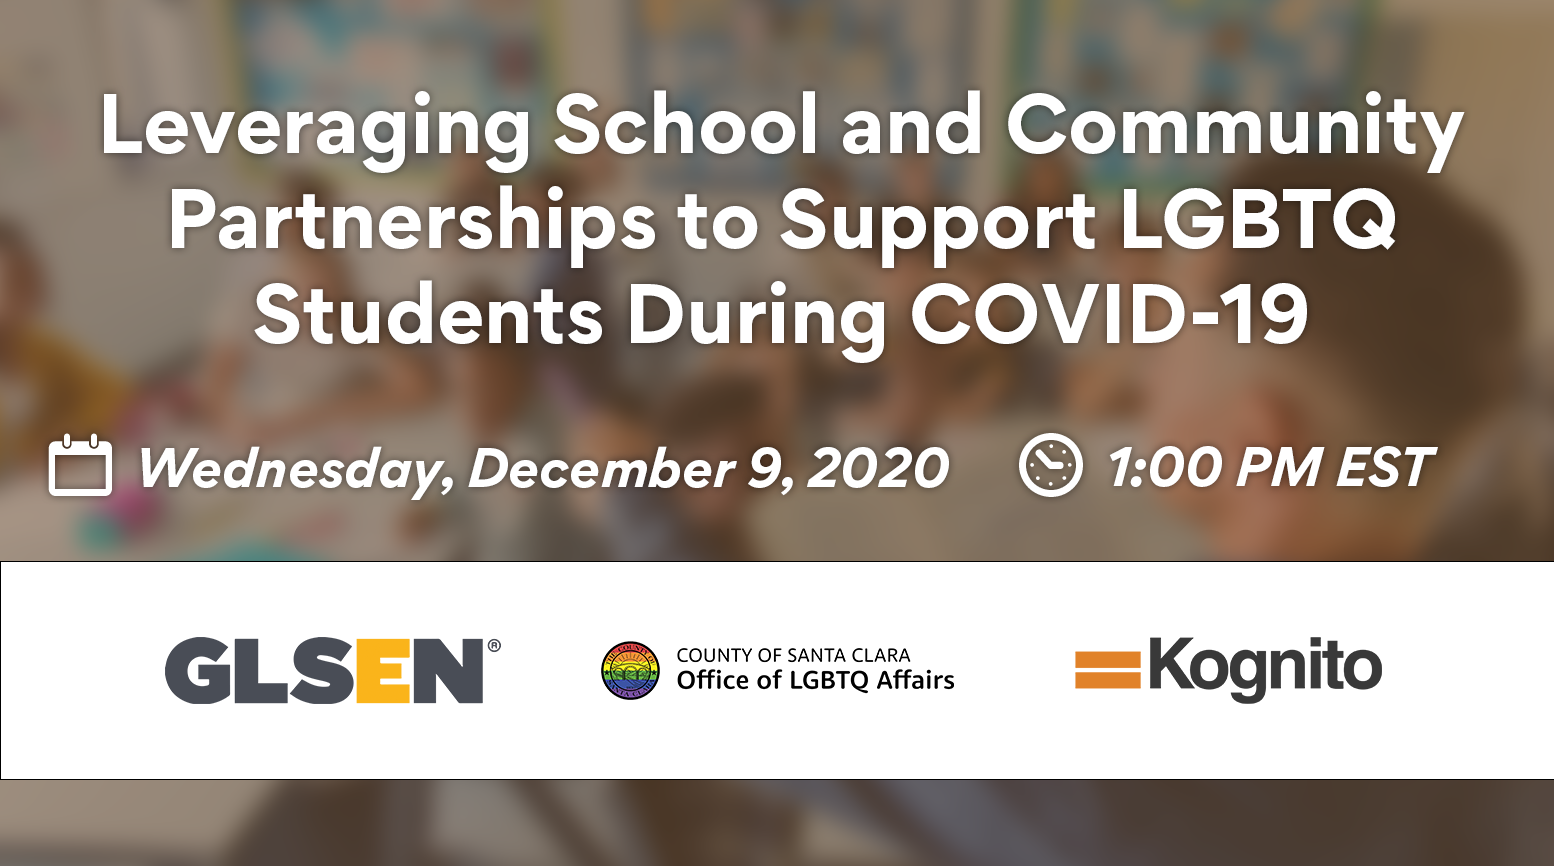 Leveraging School and Community Partnerships to Support LGBTQ Students During COVID-19